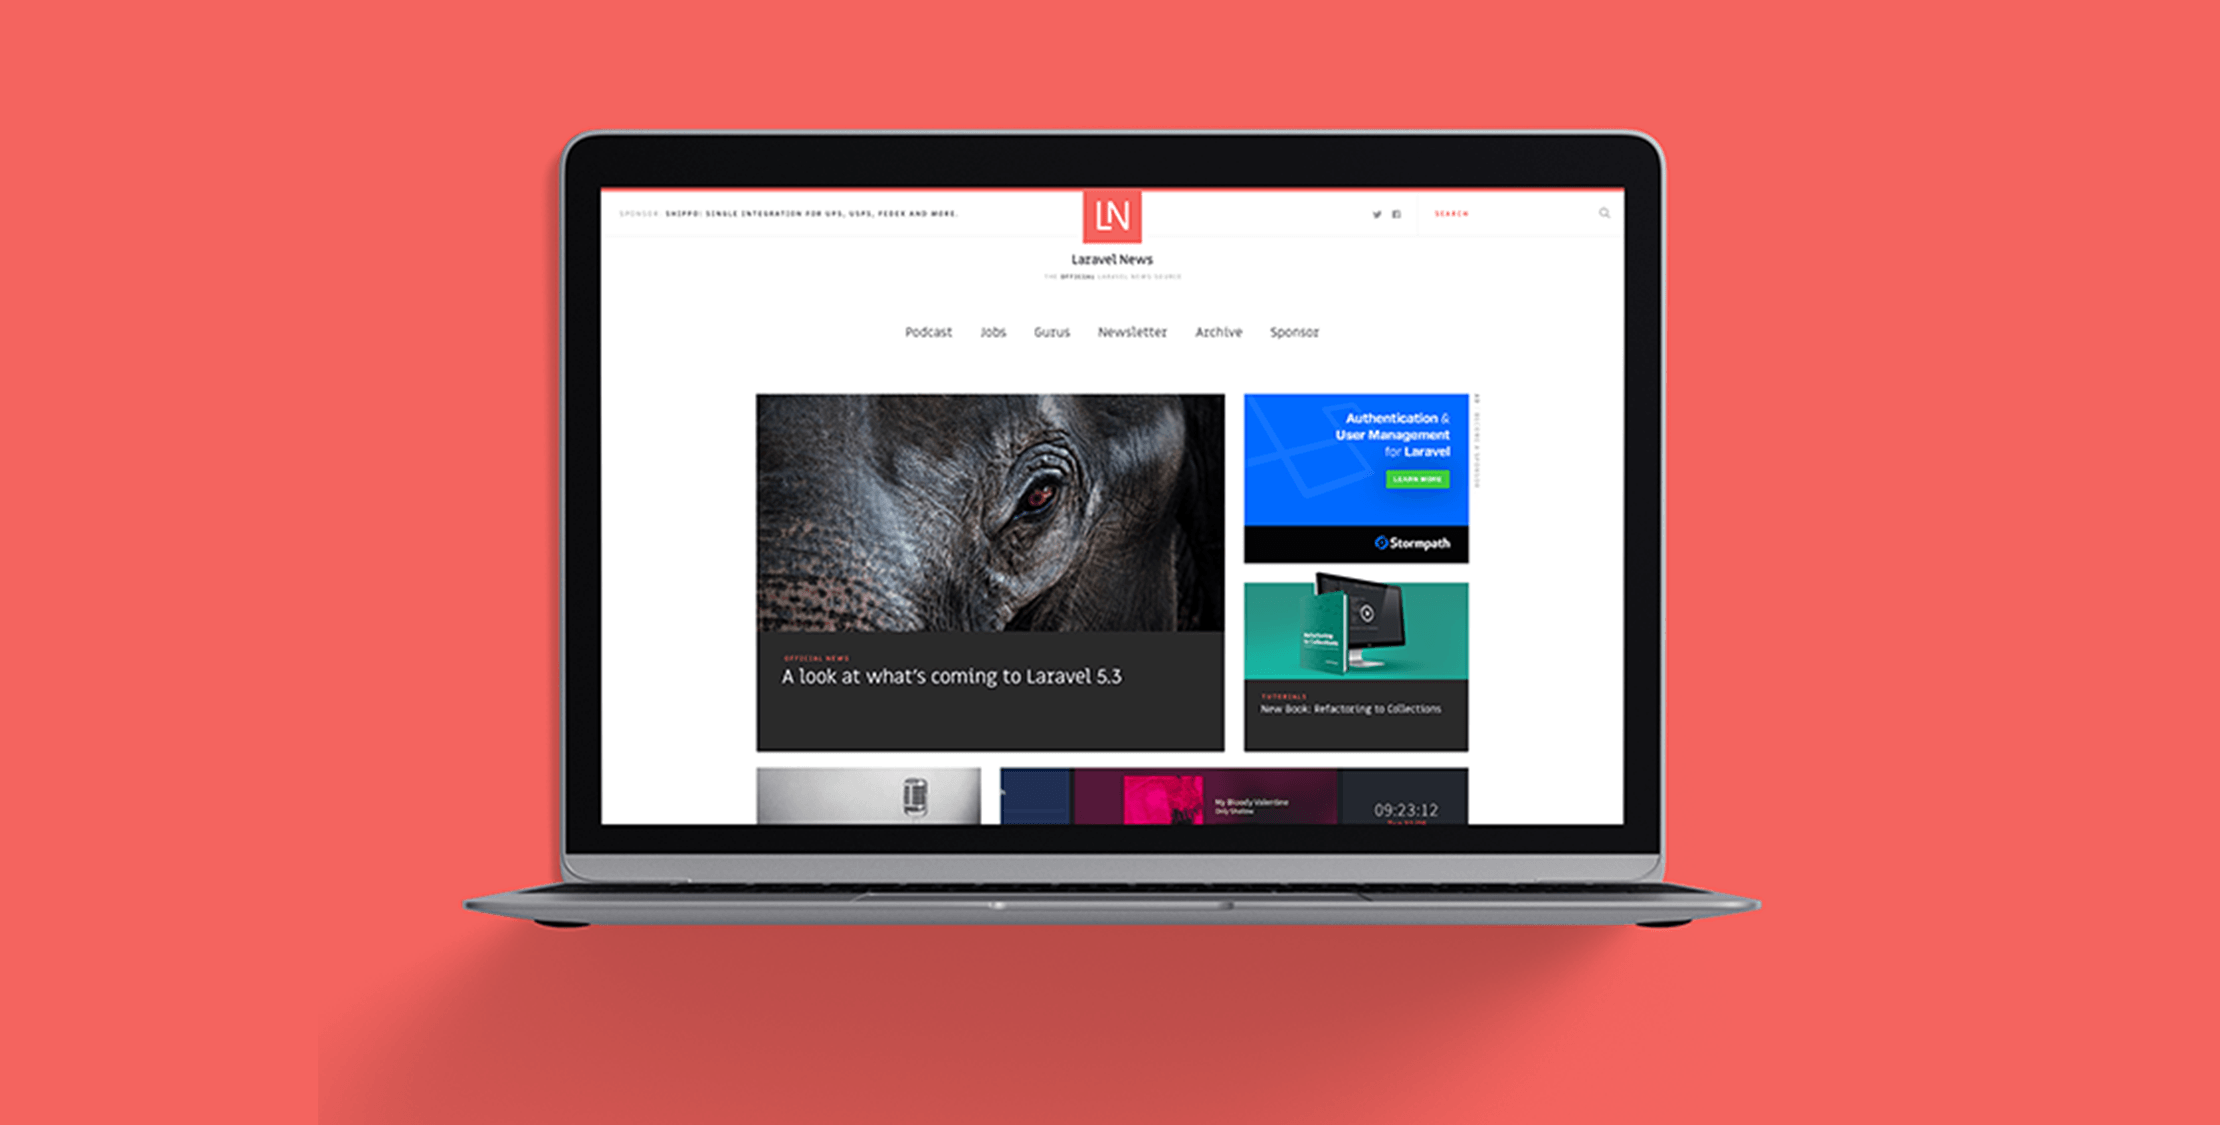 Welcome to the next version of Laravel News image